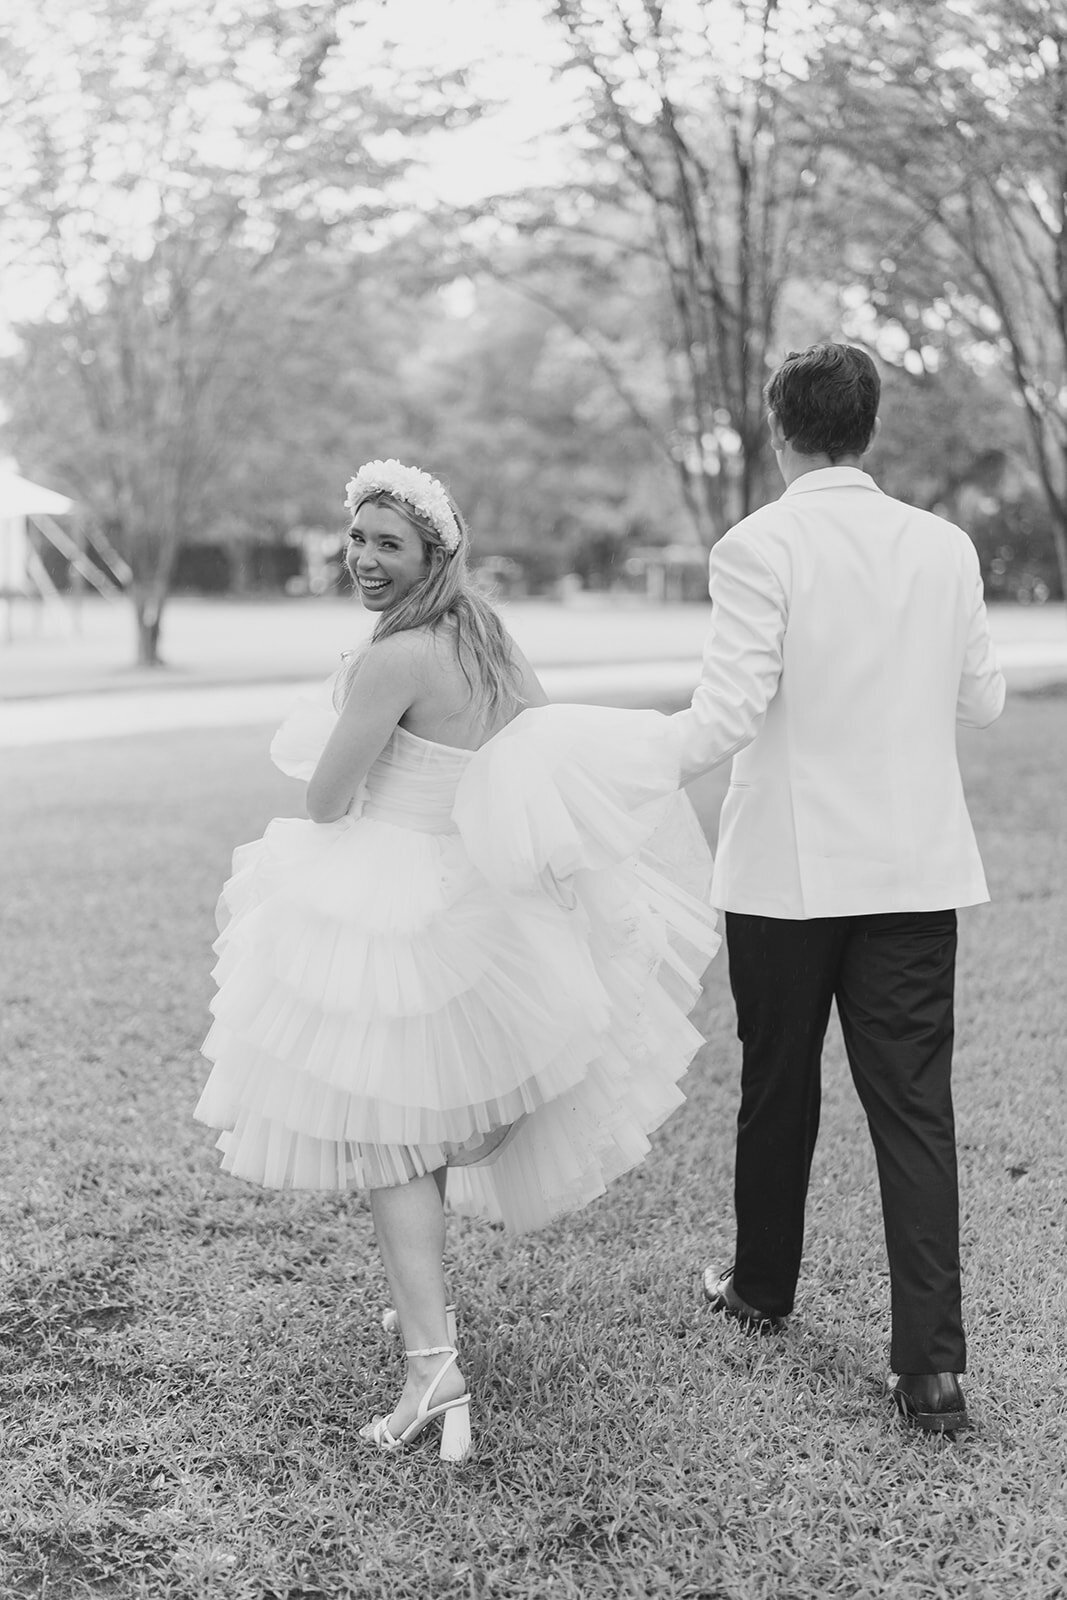 Bride in layered tulle dress. Groom in white tuxedo jacket helping bride with dress during Lowndes Grove wedding. Kailee DiMeglio Photography.